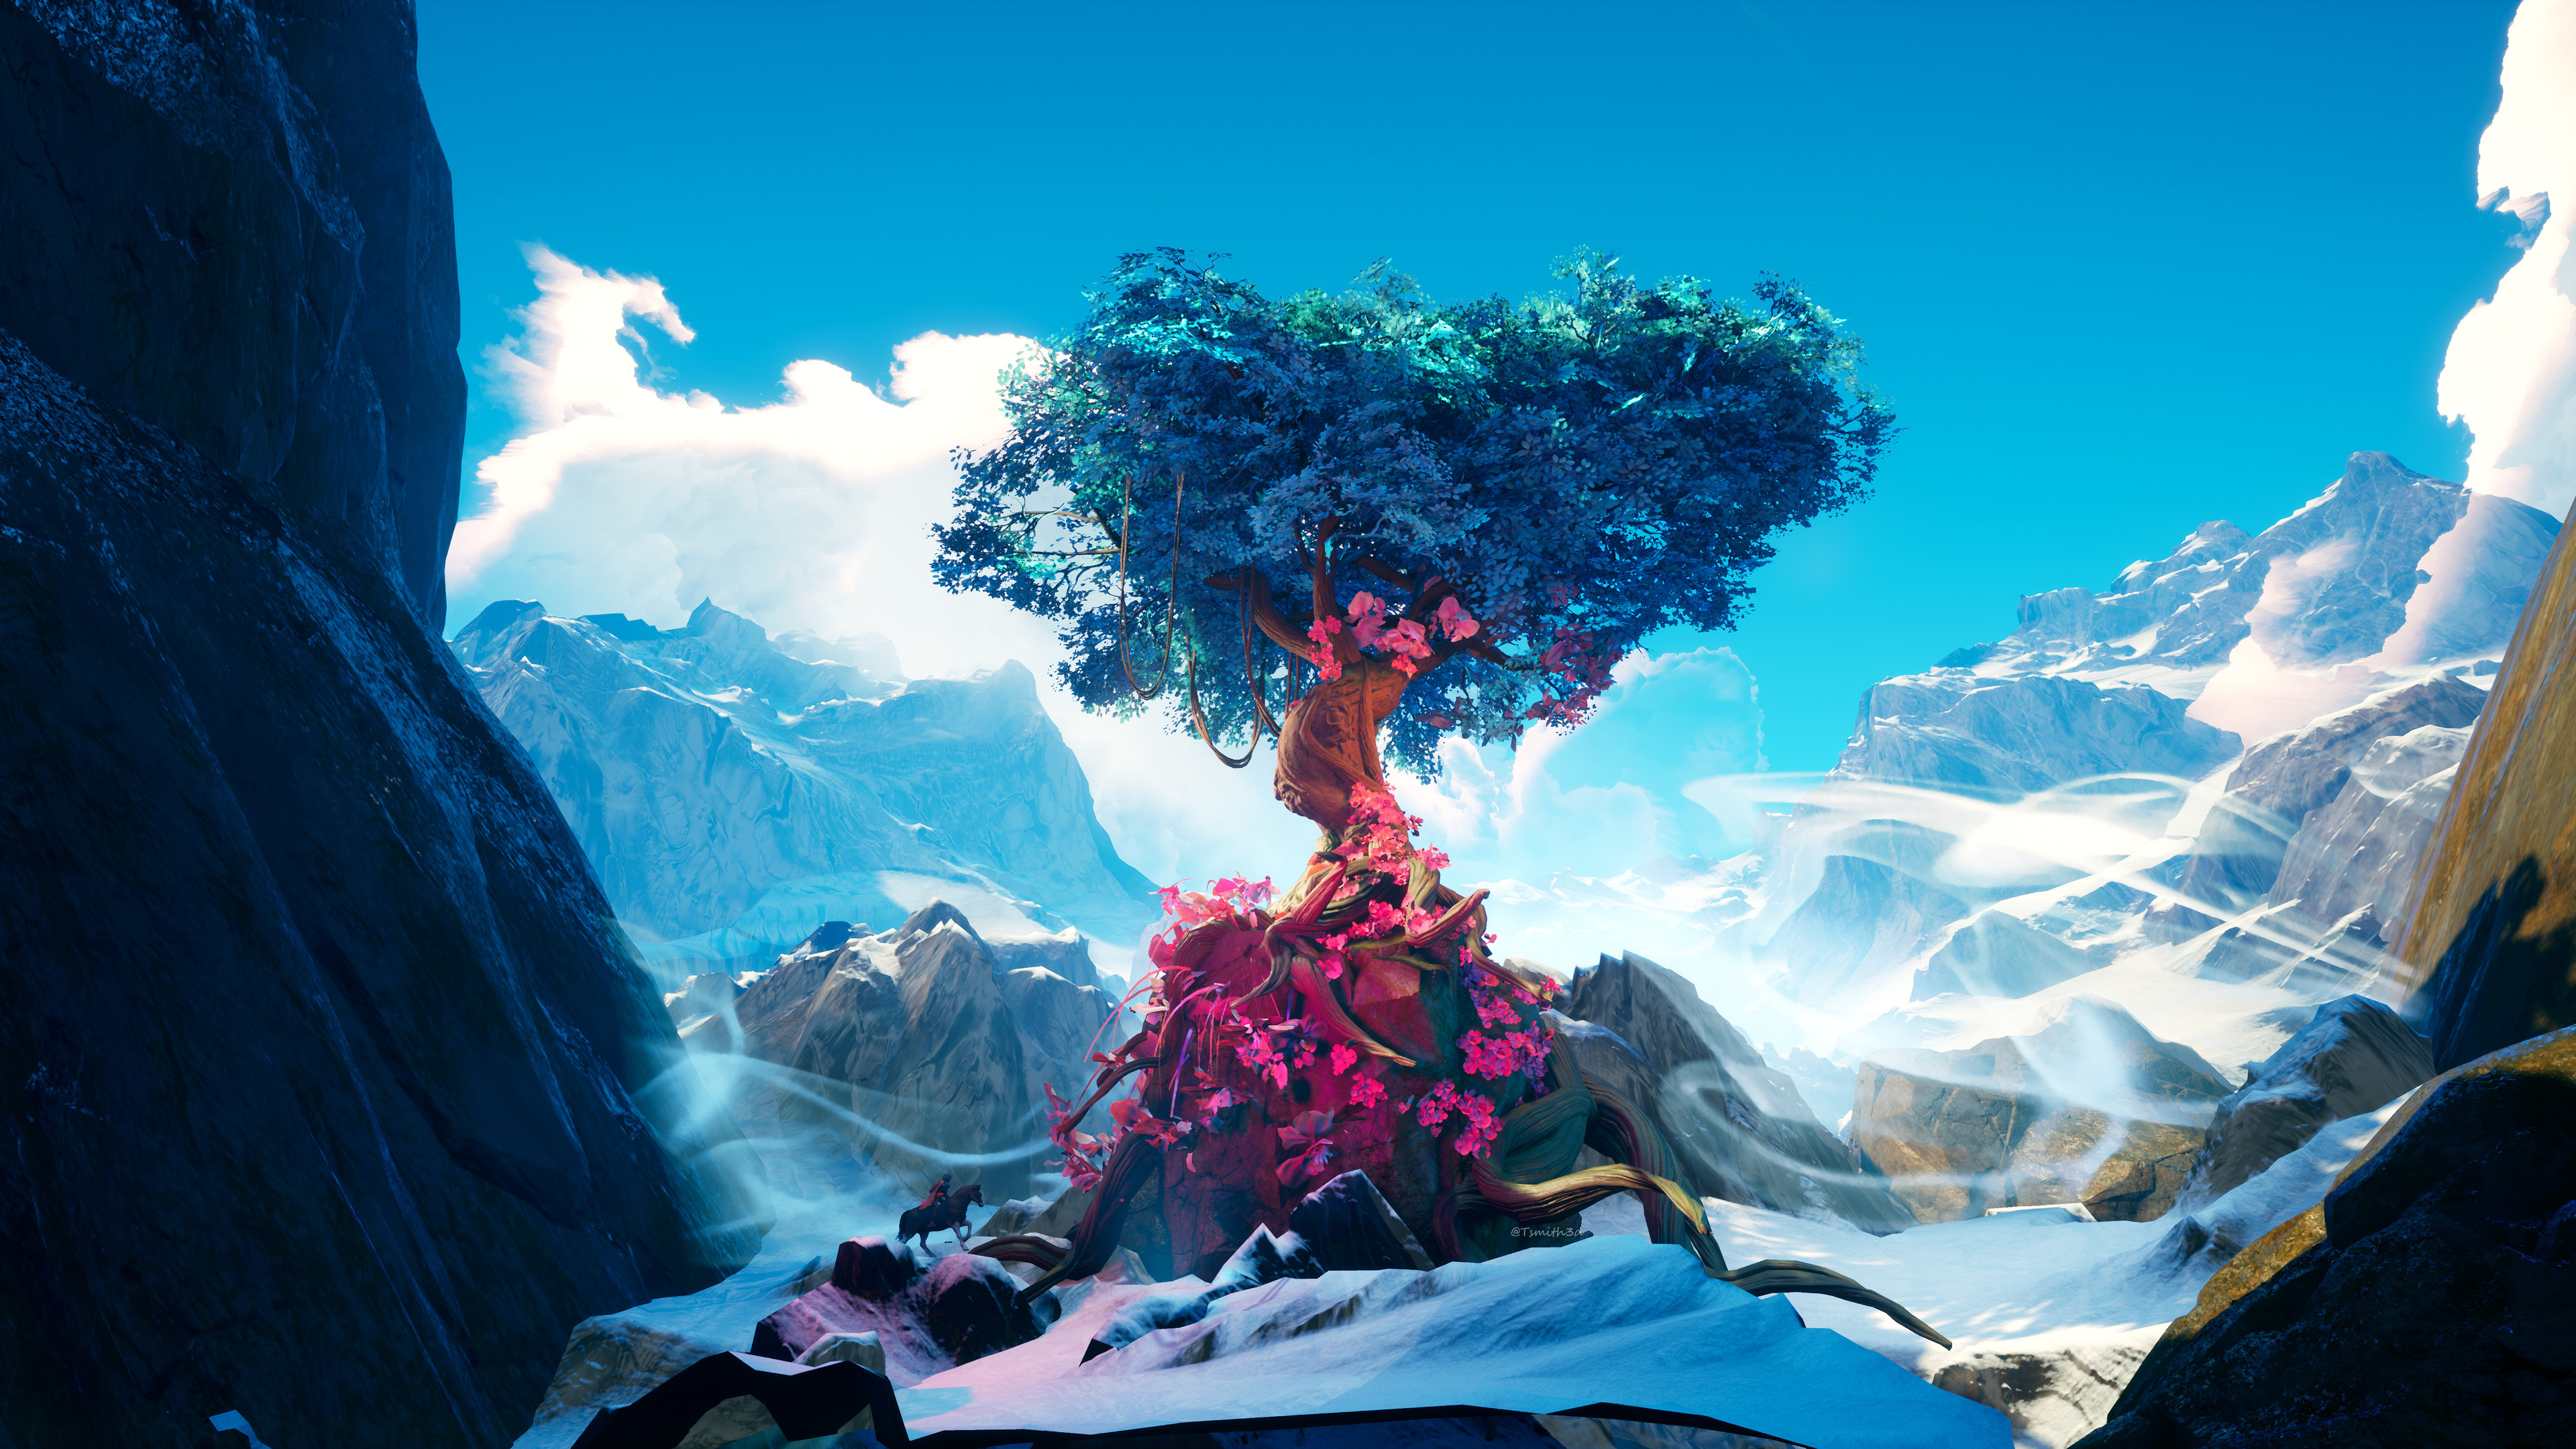 Tree On the Mountain UE4 by Tyler Smith